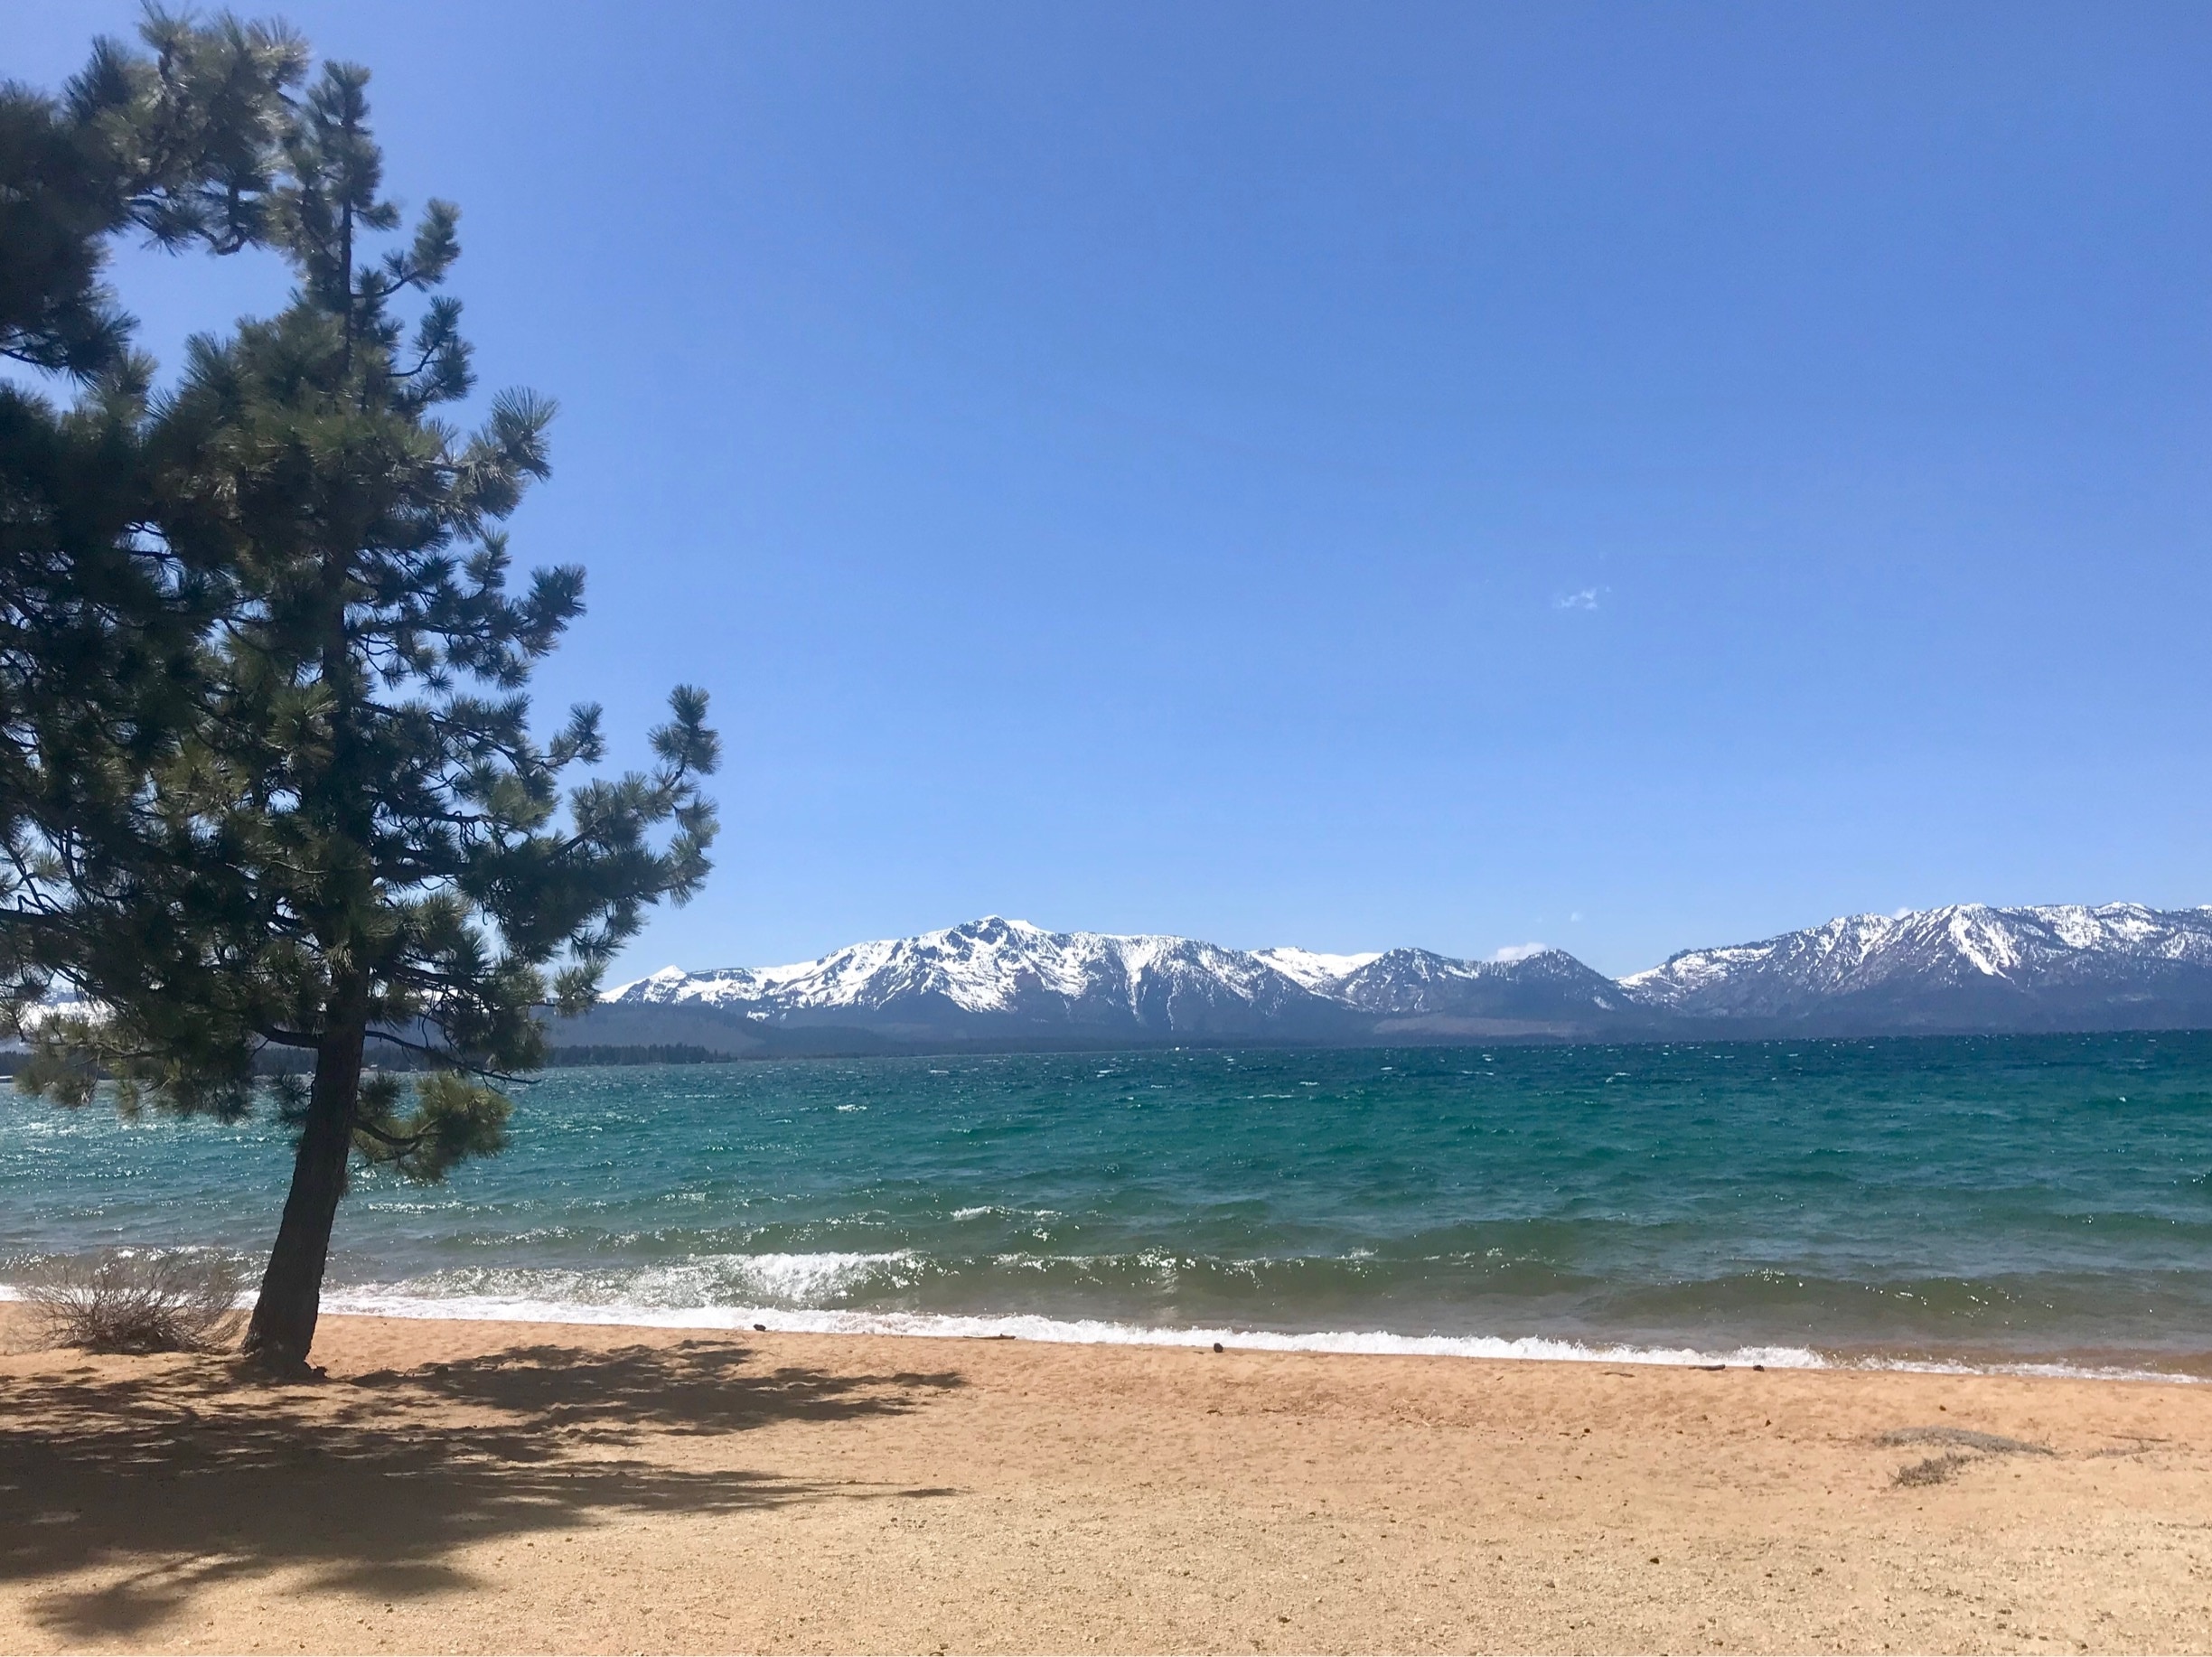 It was a chilly day in South Lake Tahoe, but I had to stop to enjoy the beautiful turquoise and blues of the water and sky. 